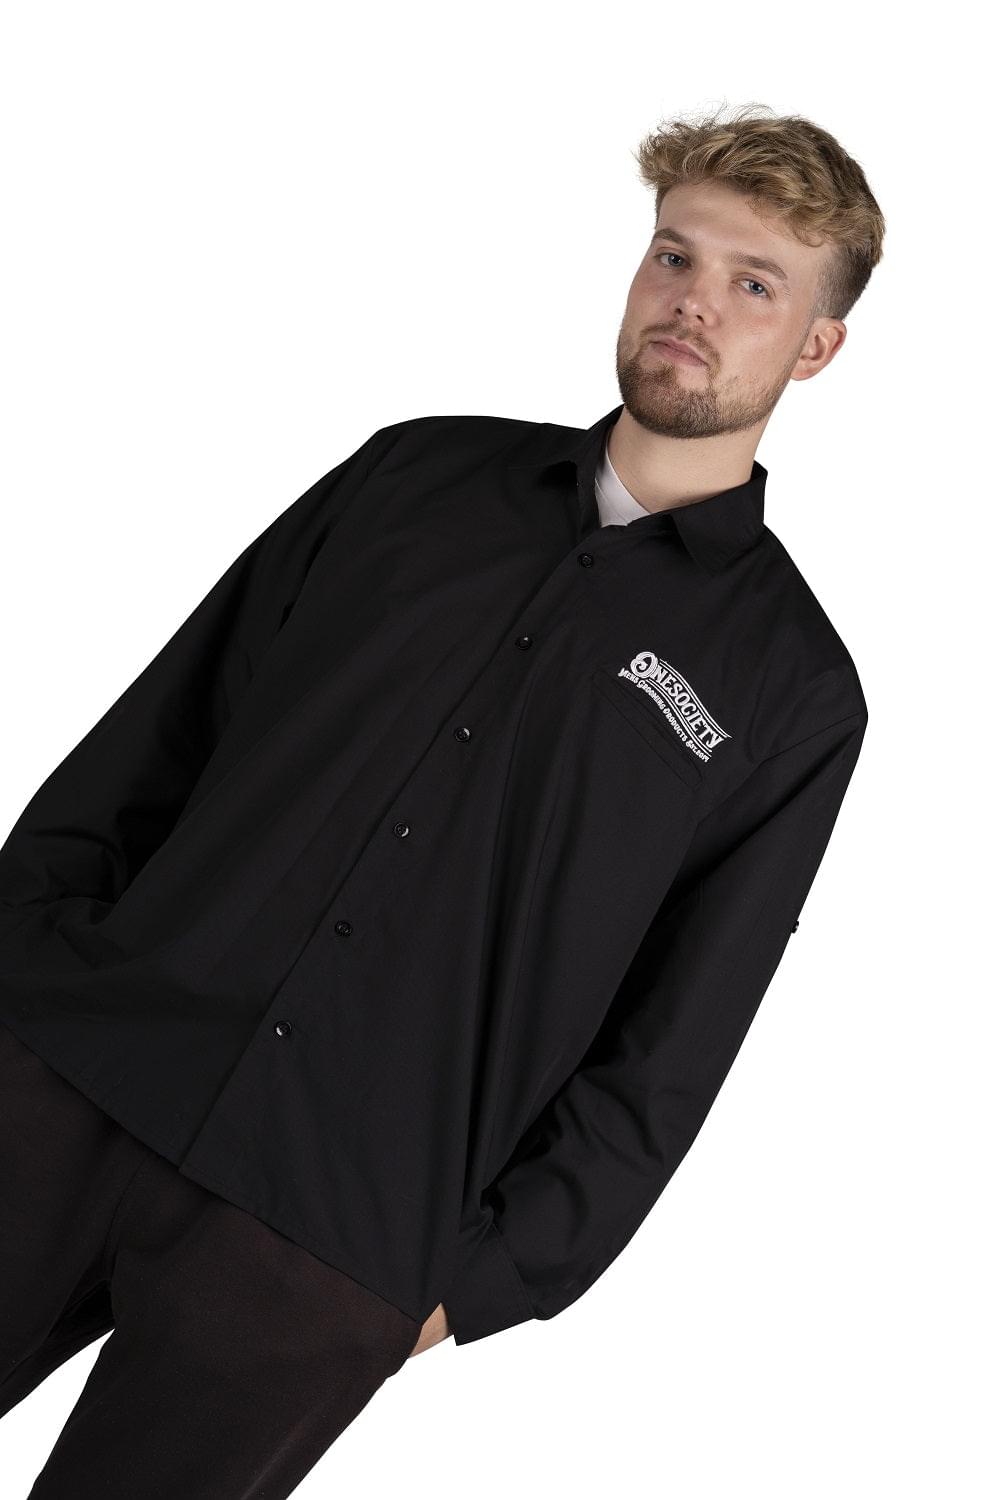 Premium Quality Black Shirt by One Society - Bold and Stylish with Roll-Up Sleeves and Vented Pocket. Onesociety Men's Long Sleeve Shirt.